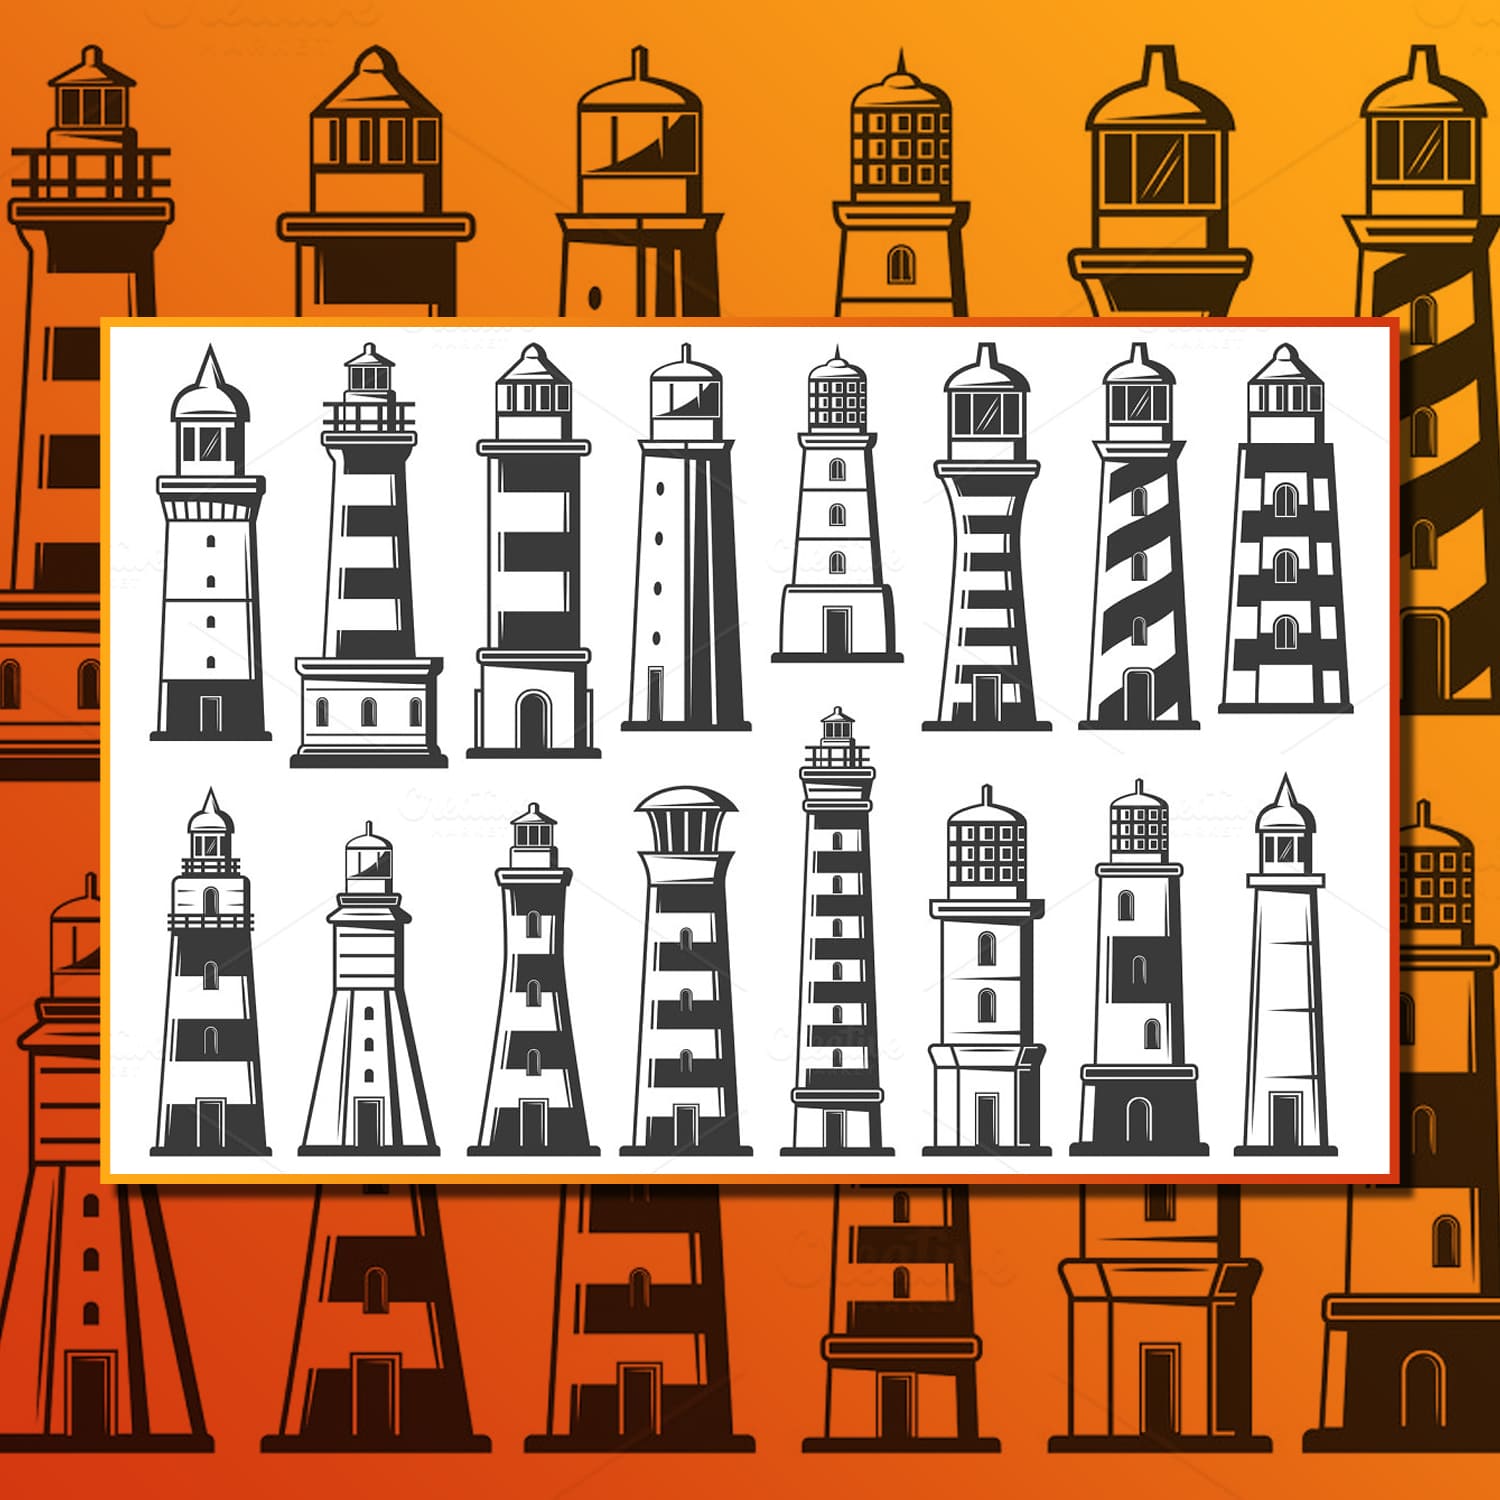 Many beacons with black stripes in the design.